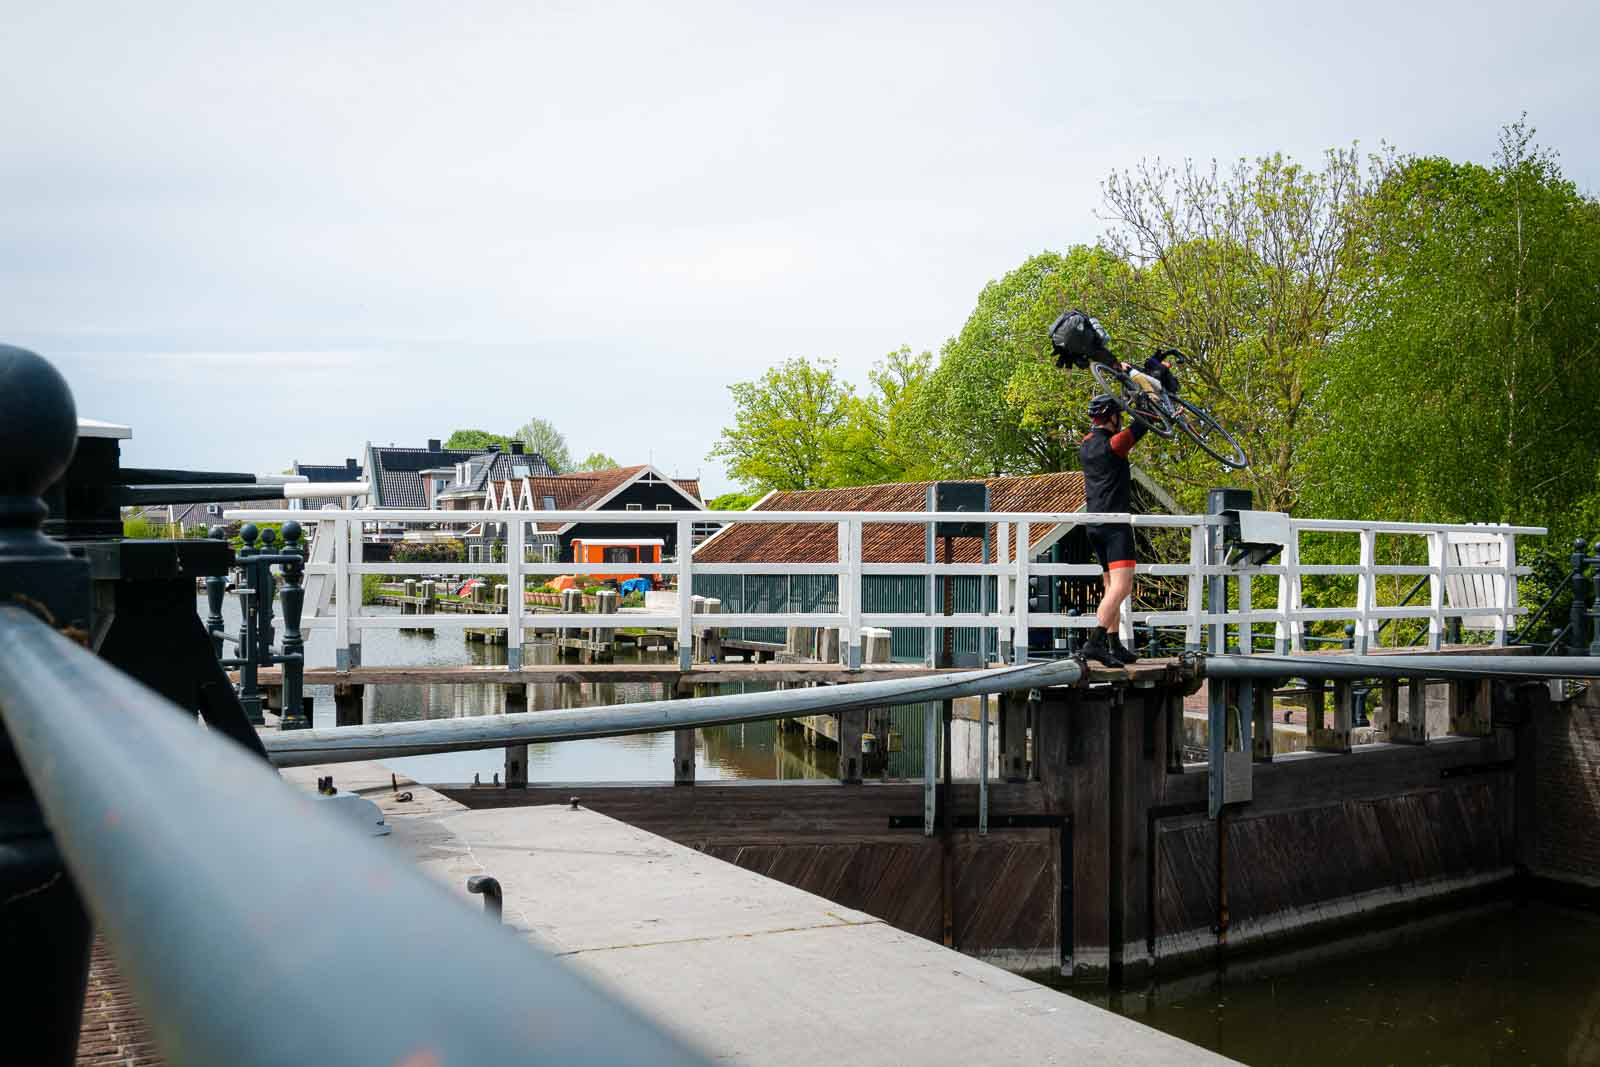 A cyclist taking part in the Race around the Netherlands carries his bike over a lock.